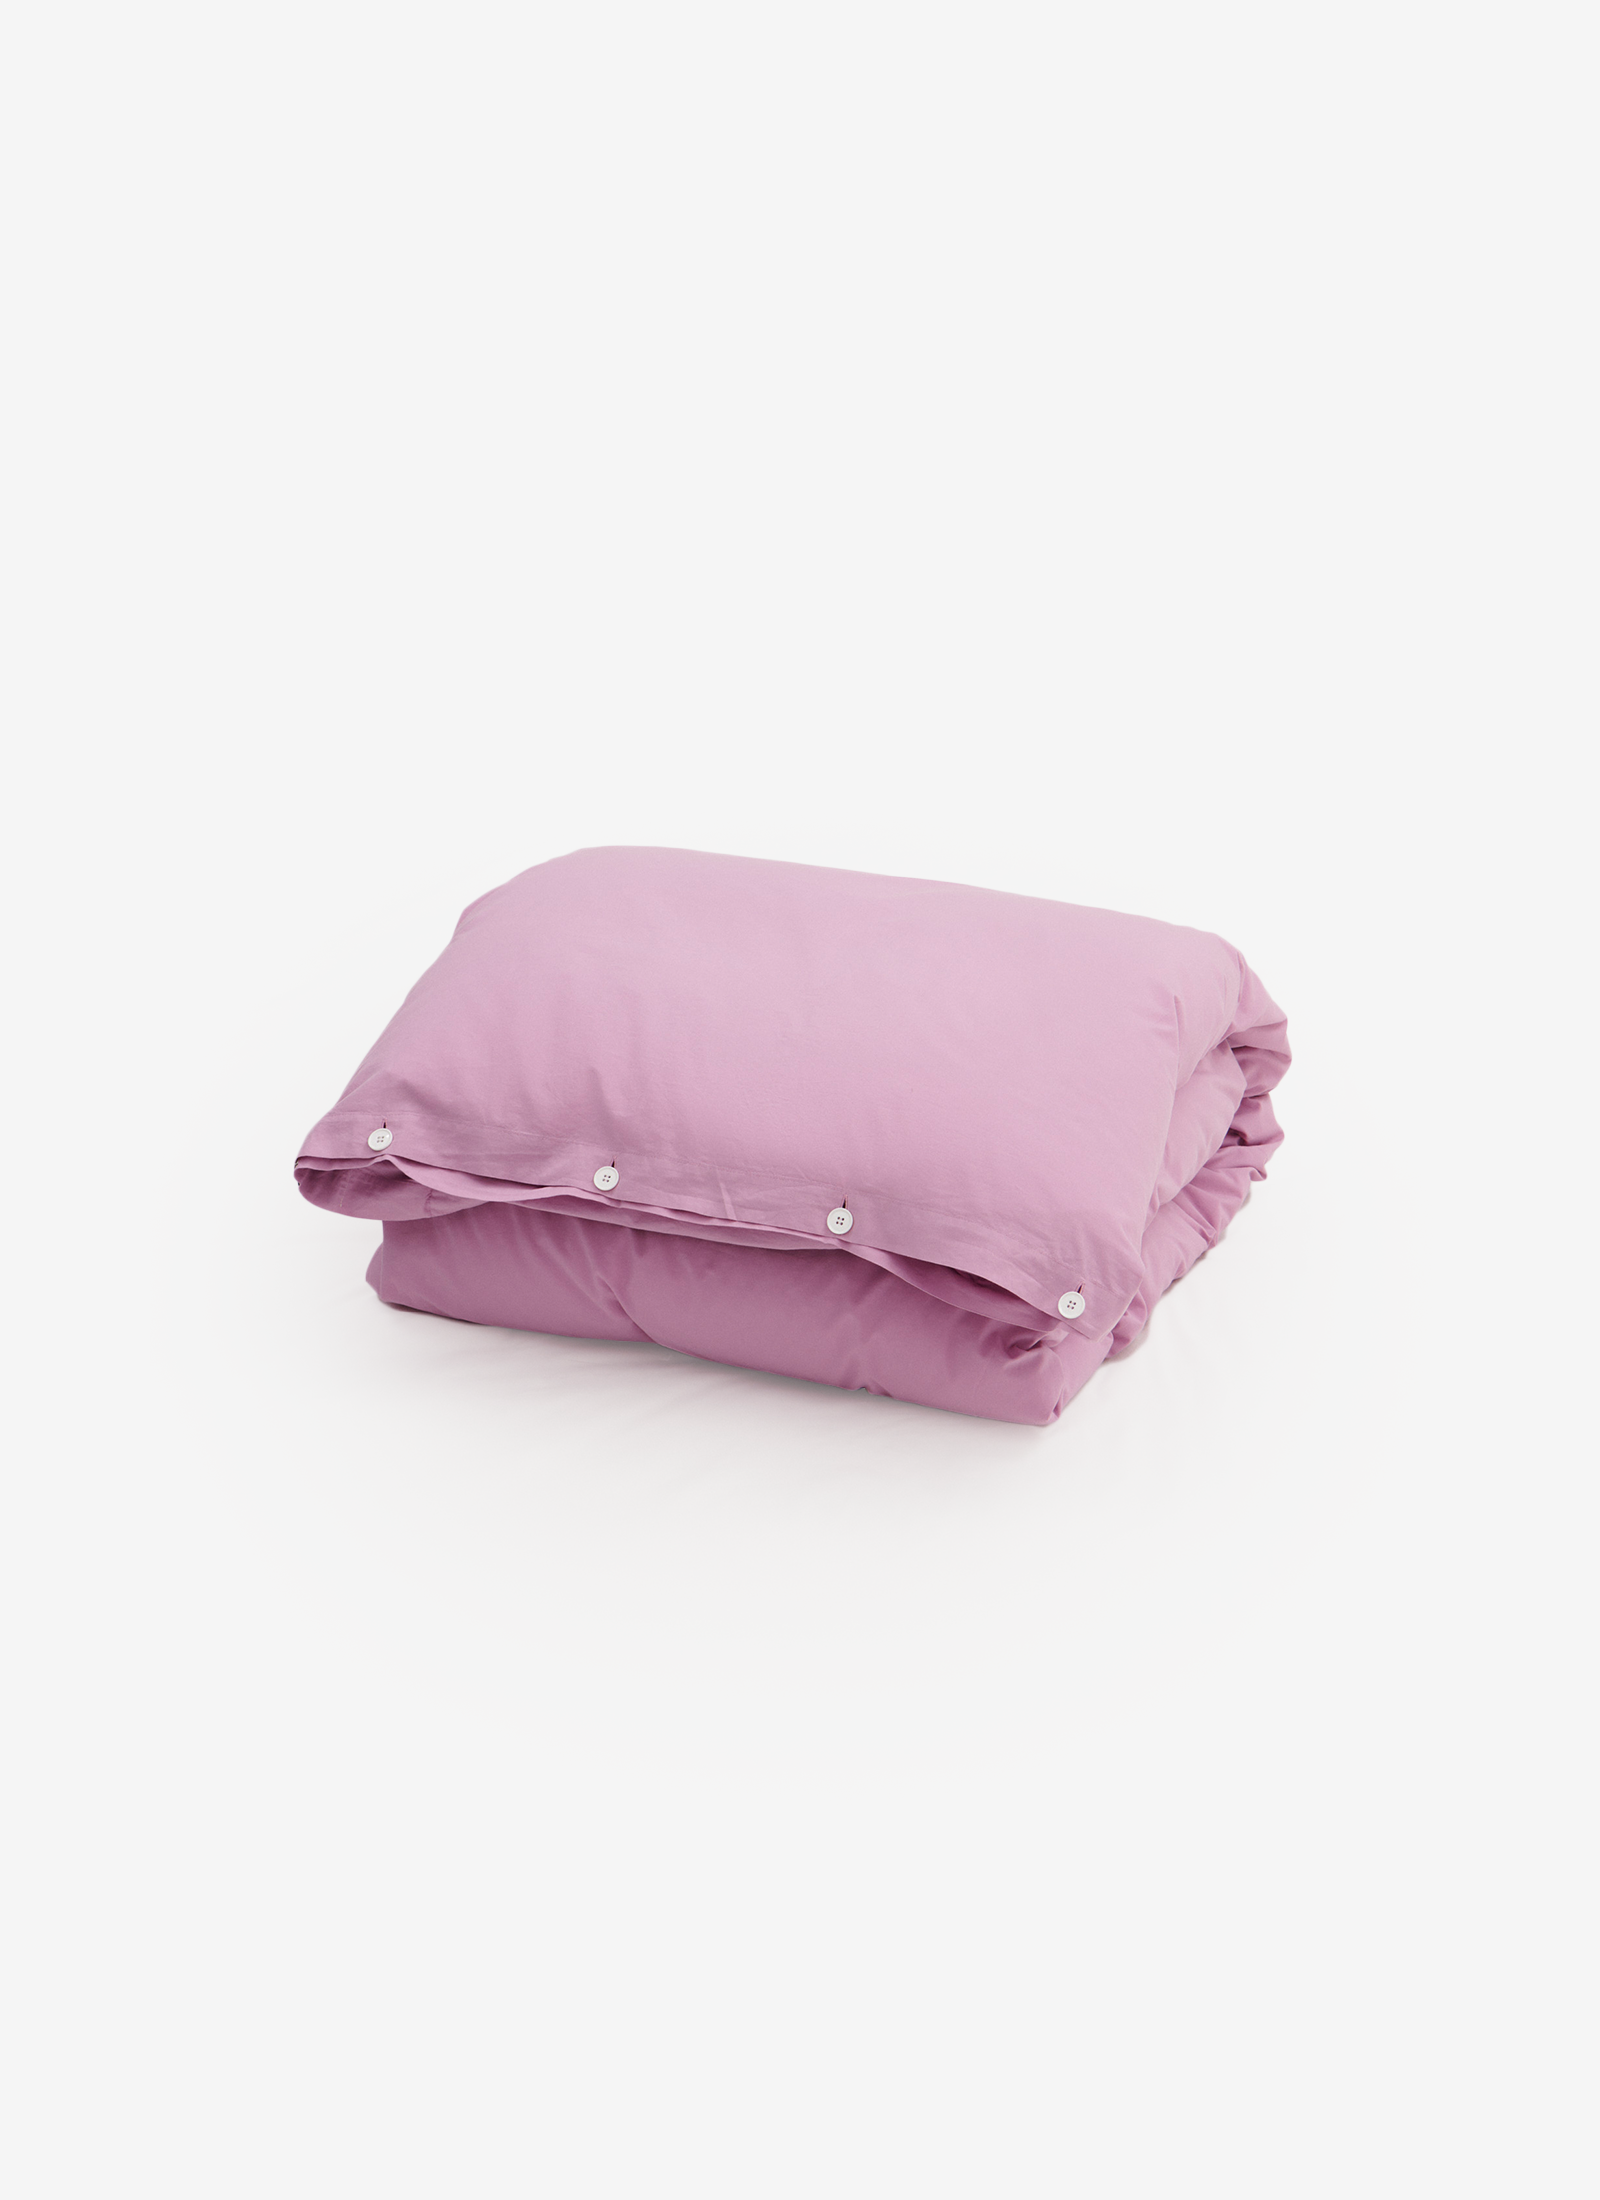 Duvet Cover in Mallow Pink